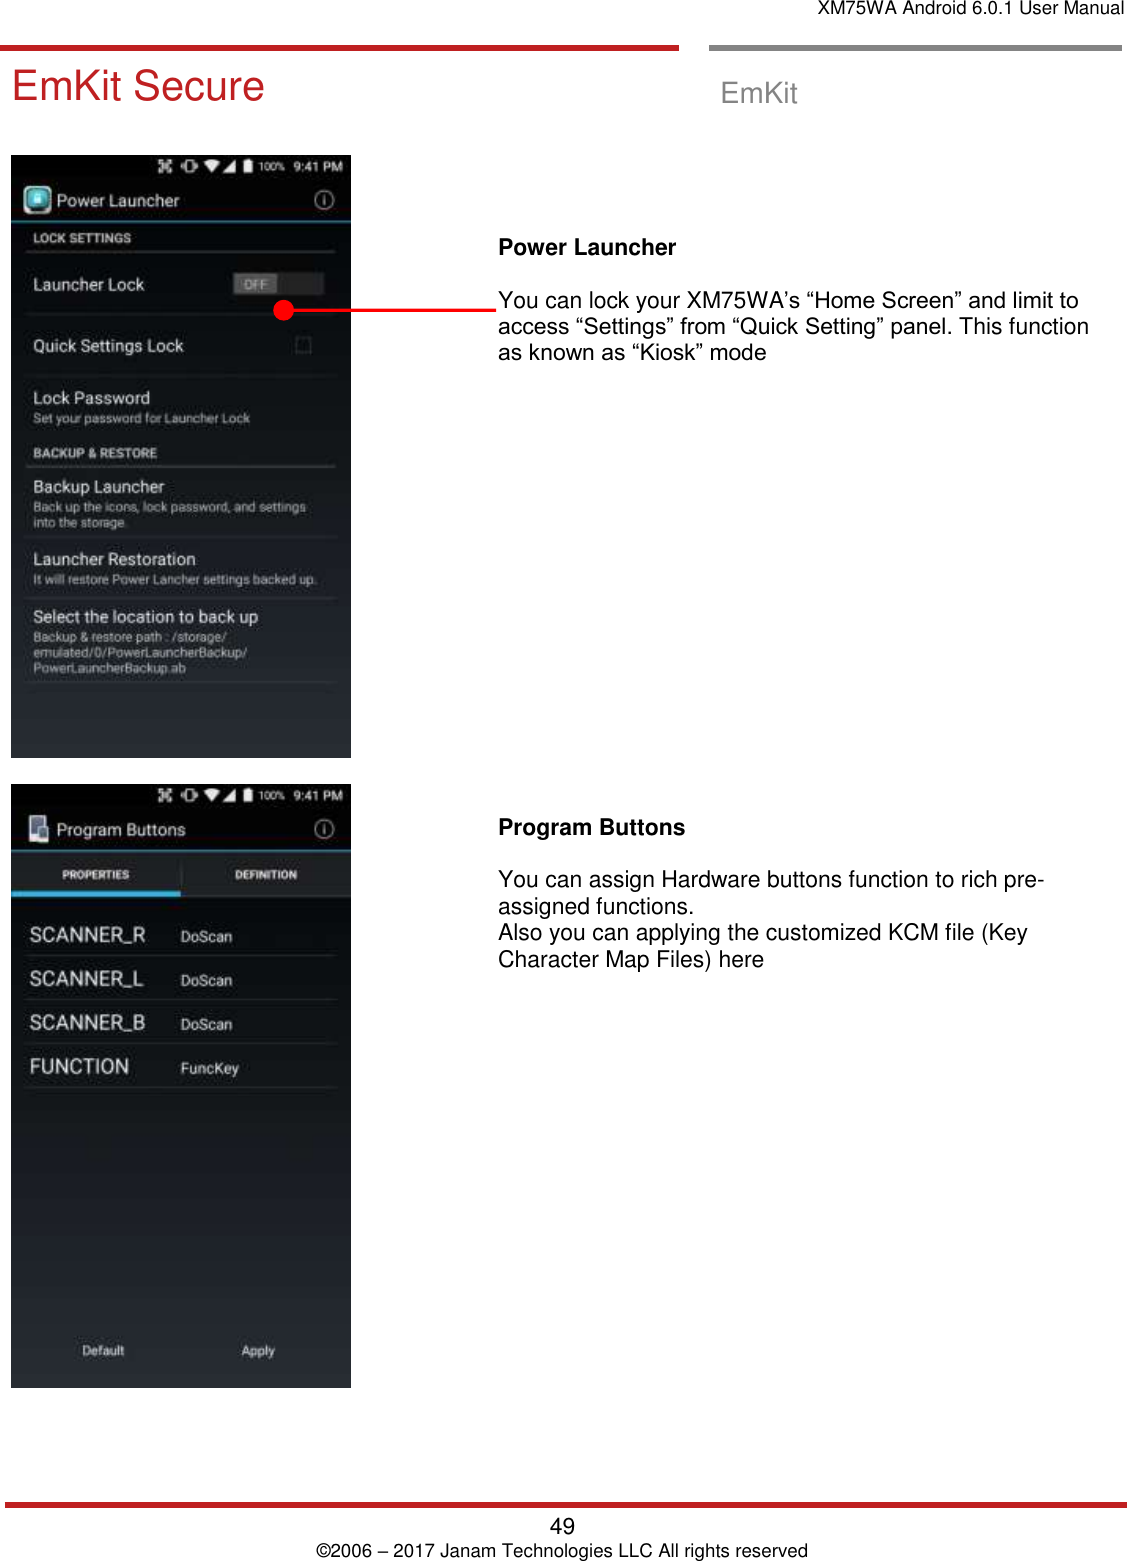 XM75WA Android 6.0.1 User Manual   49 © 2006 – 2017 Janam Technologies LLC All rights reserved  EmKit Secure  EmKit Secure   EmKit           Power Launcher  You can lock your XM75WA’s “Home Screen” and limit to access “Settings” from “Quick Setting” panel. This function as known as “Kiosk” mode                    Program Buttons   You can assign Hardware buttons function to rich pre-assigned functions.  Also you can applying the customized KCM file (Key Character Map Files) here  